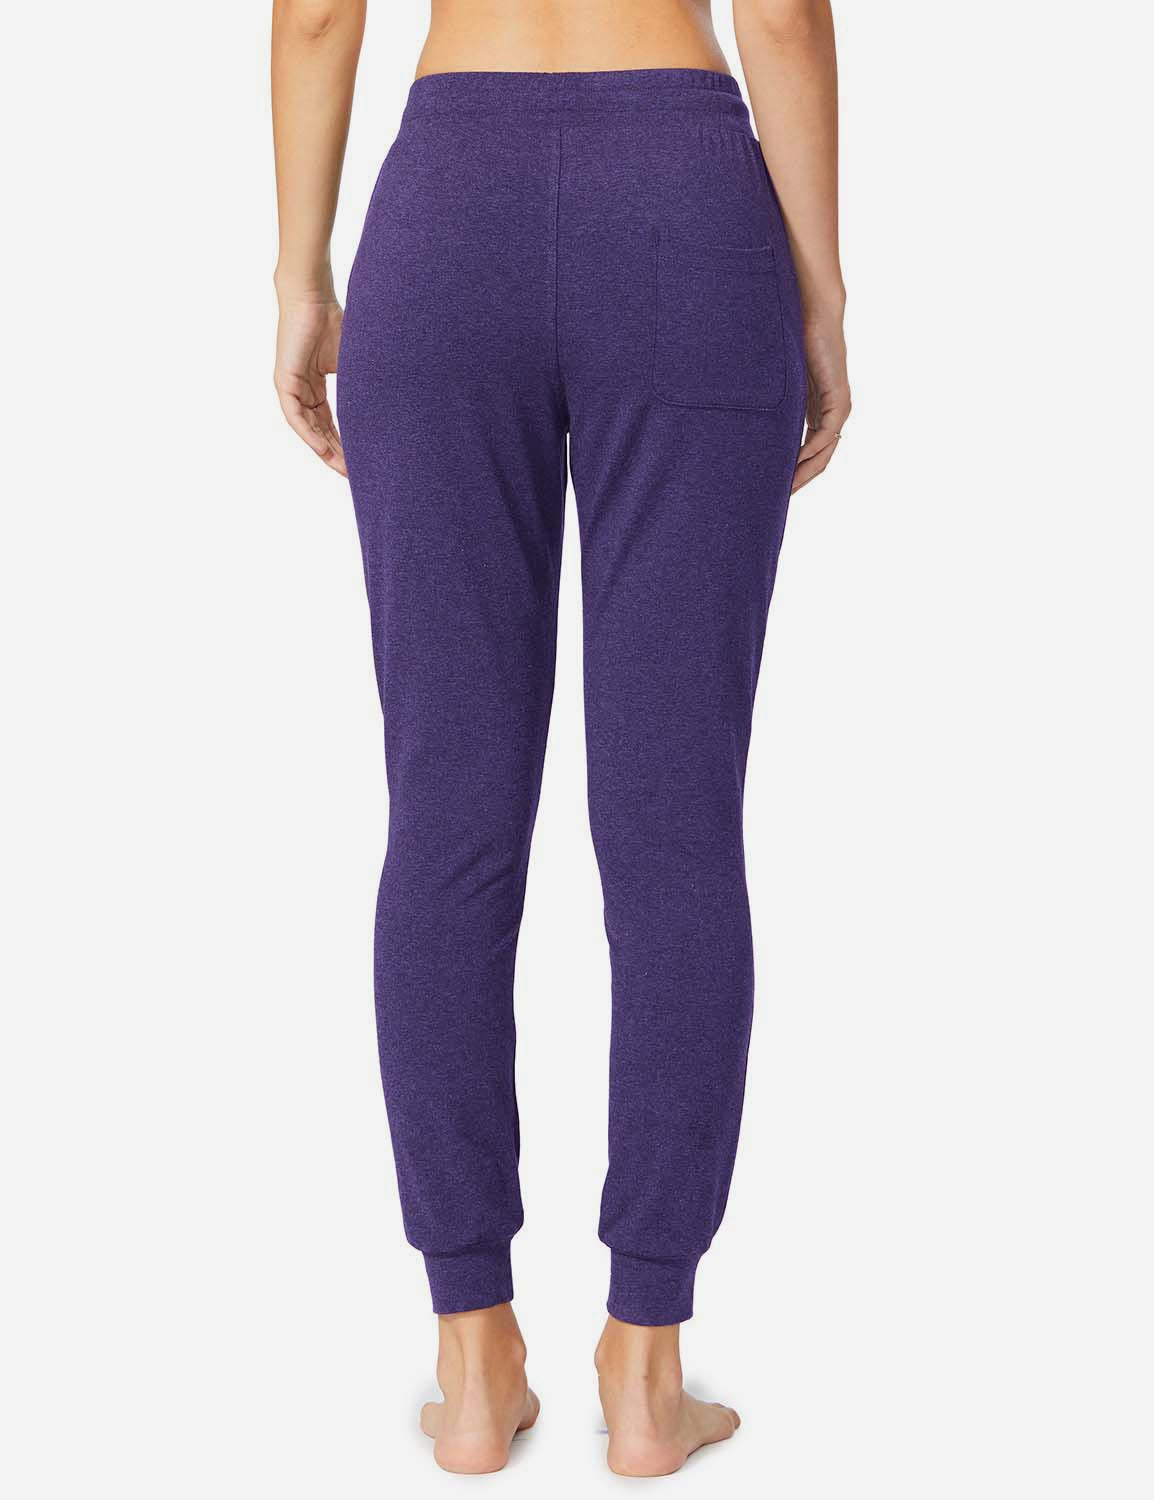 Baleaf Women's Cotton Comfy Pocketed & Tapered Weekend Joggers abh103 Purple Heather Back